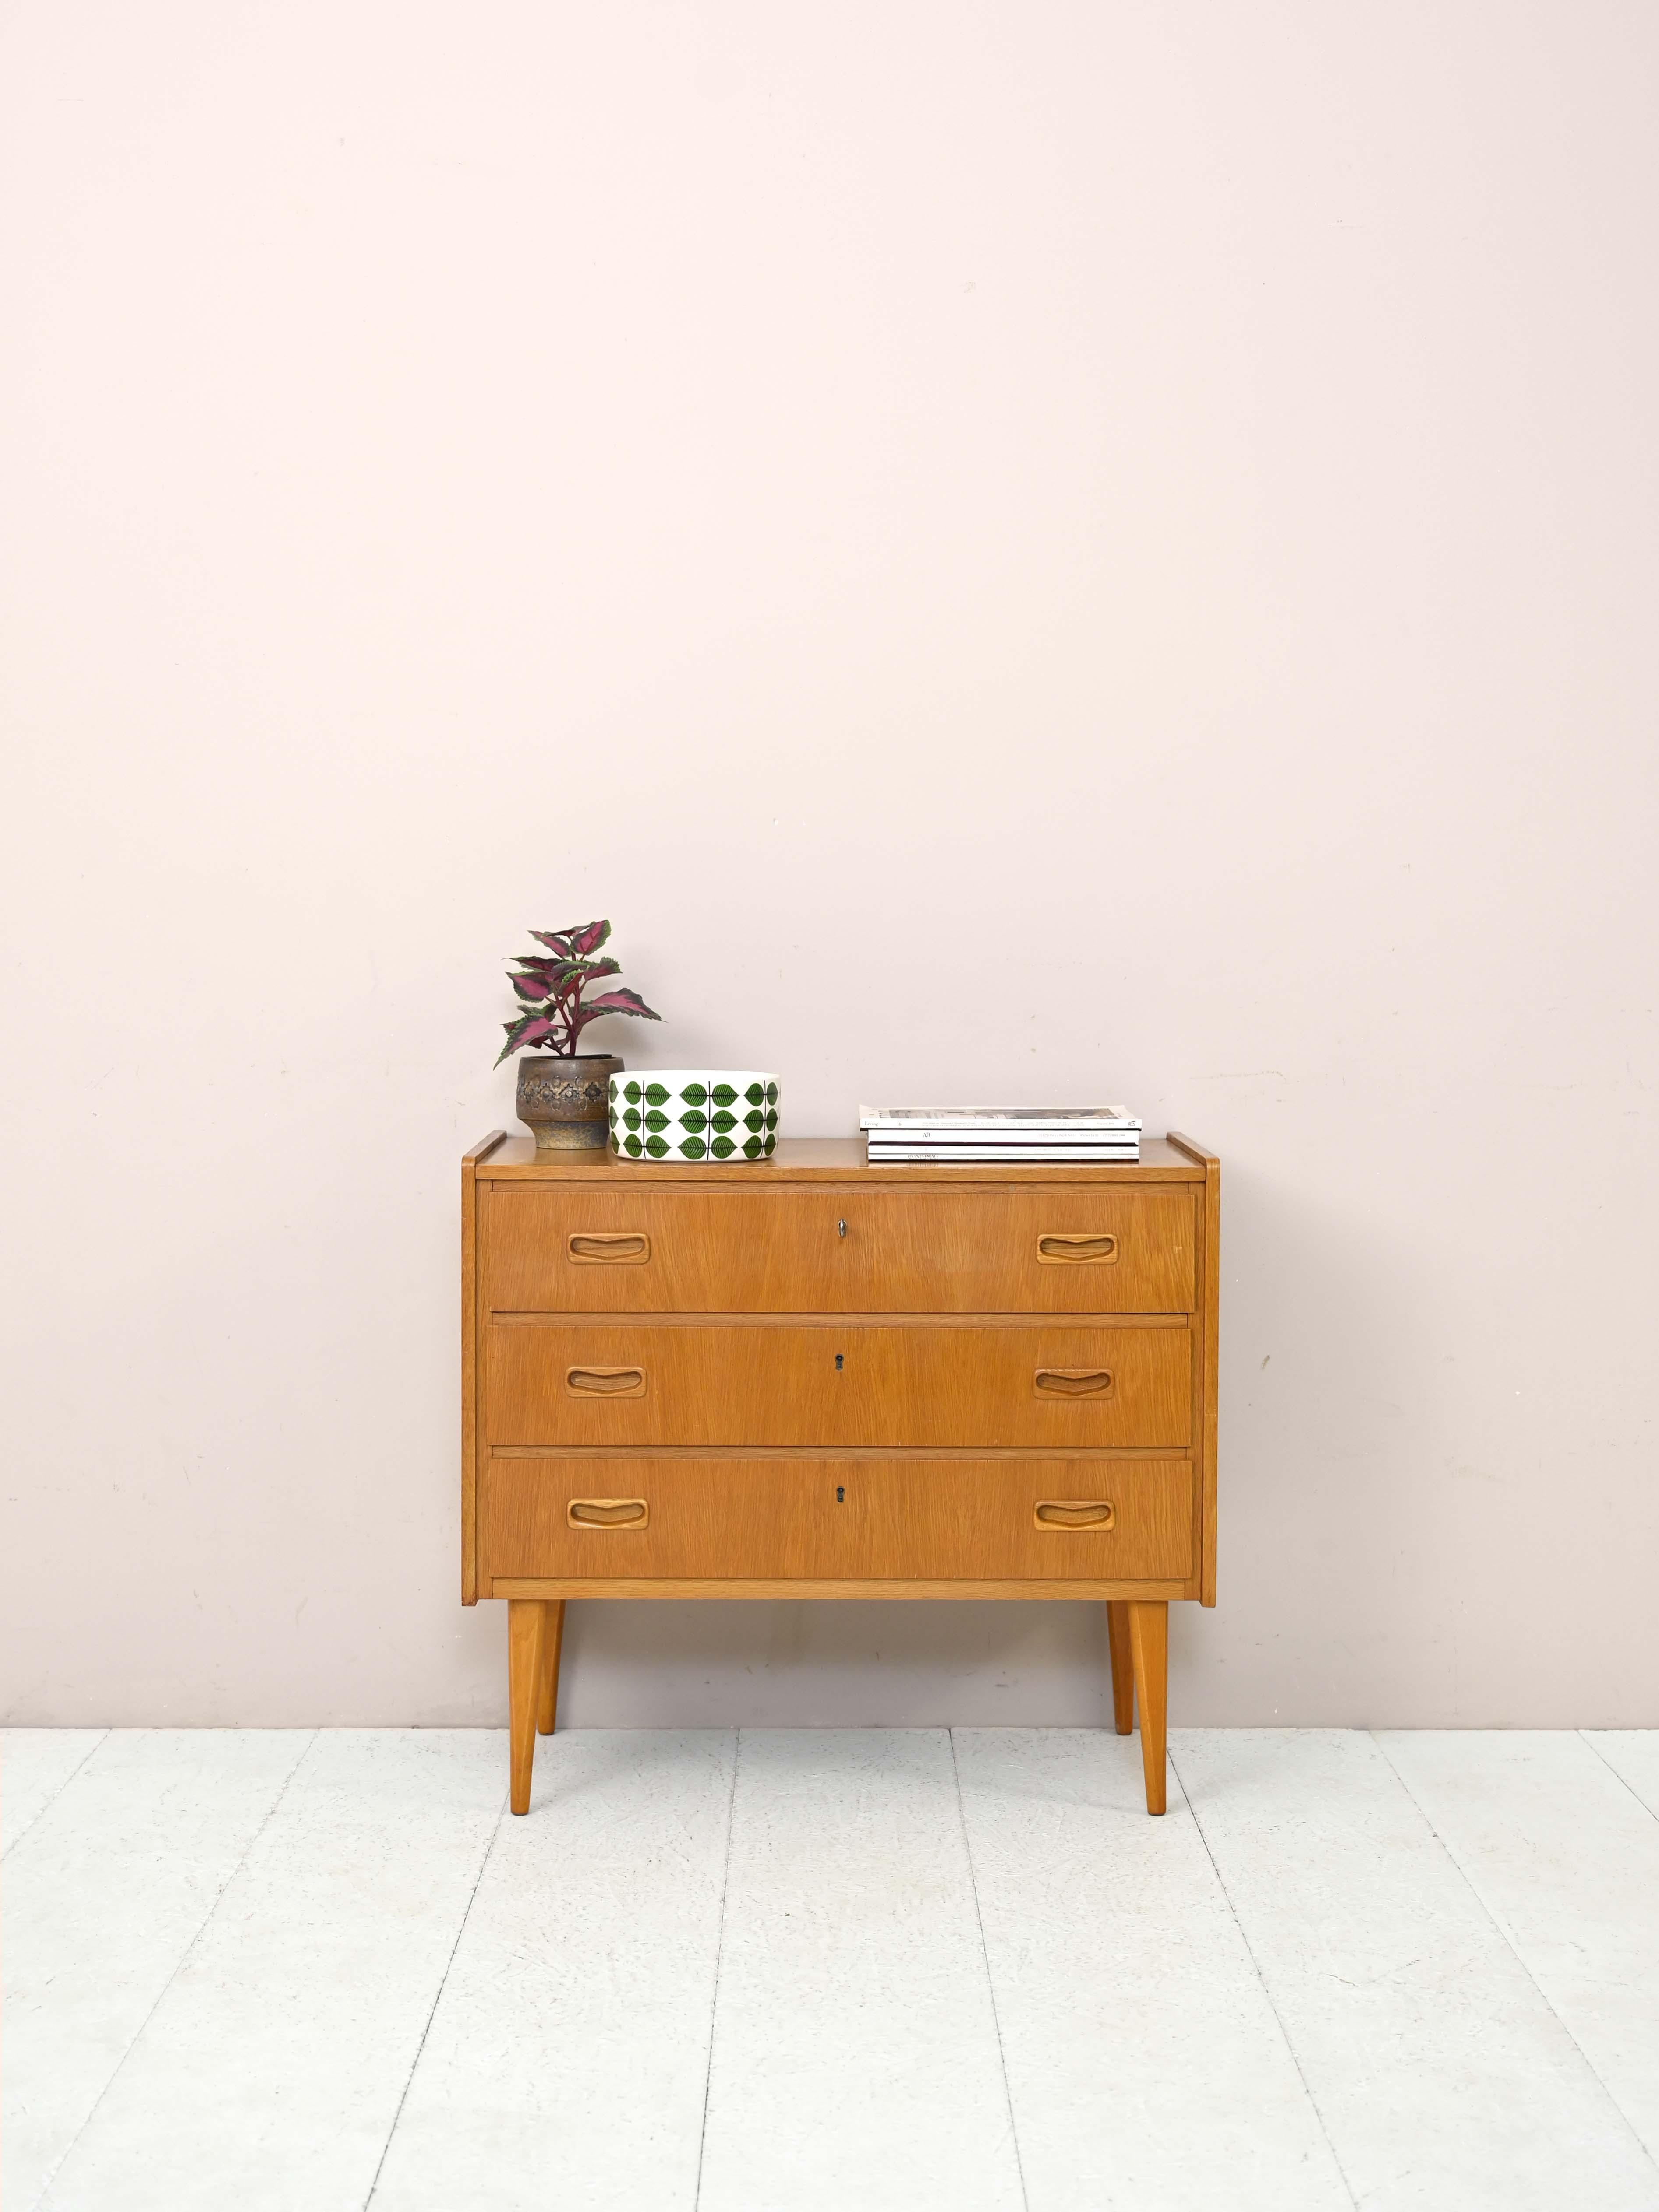 Modern 1960s teak cabinet.

A chest of drawers with modern and elegant lines that features refined details.
The drawers are lockable and feature a heart-shaped carved wooden handle.
Tapered legs slender the structure. Thanks to the golden color